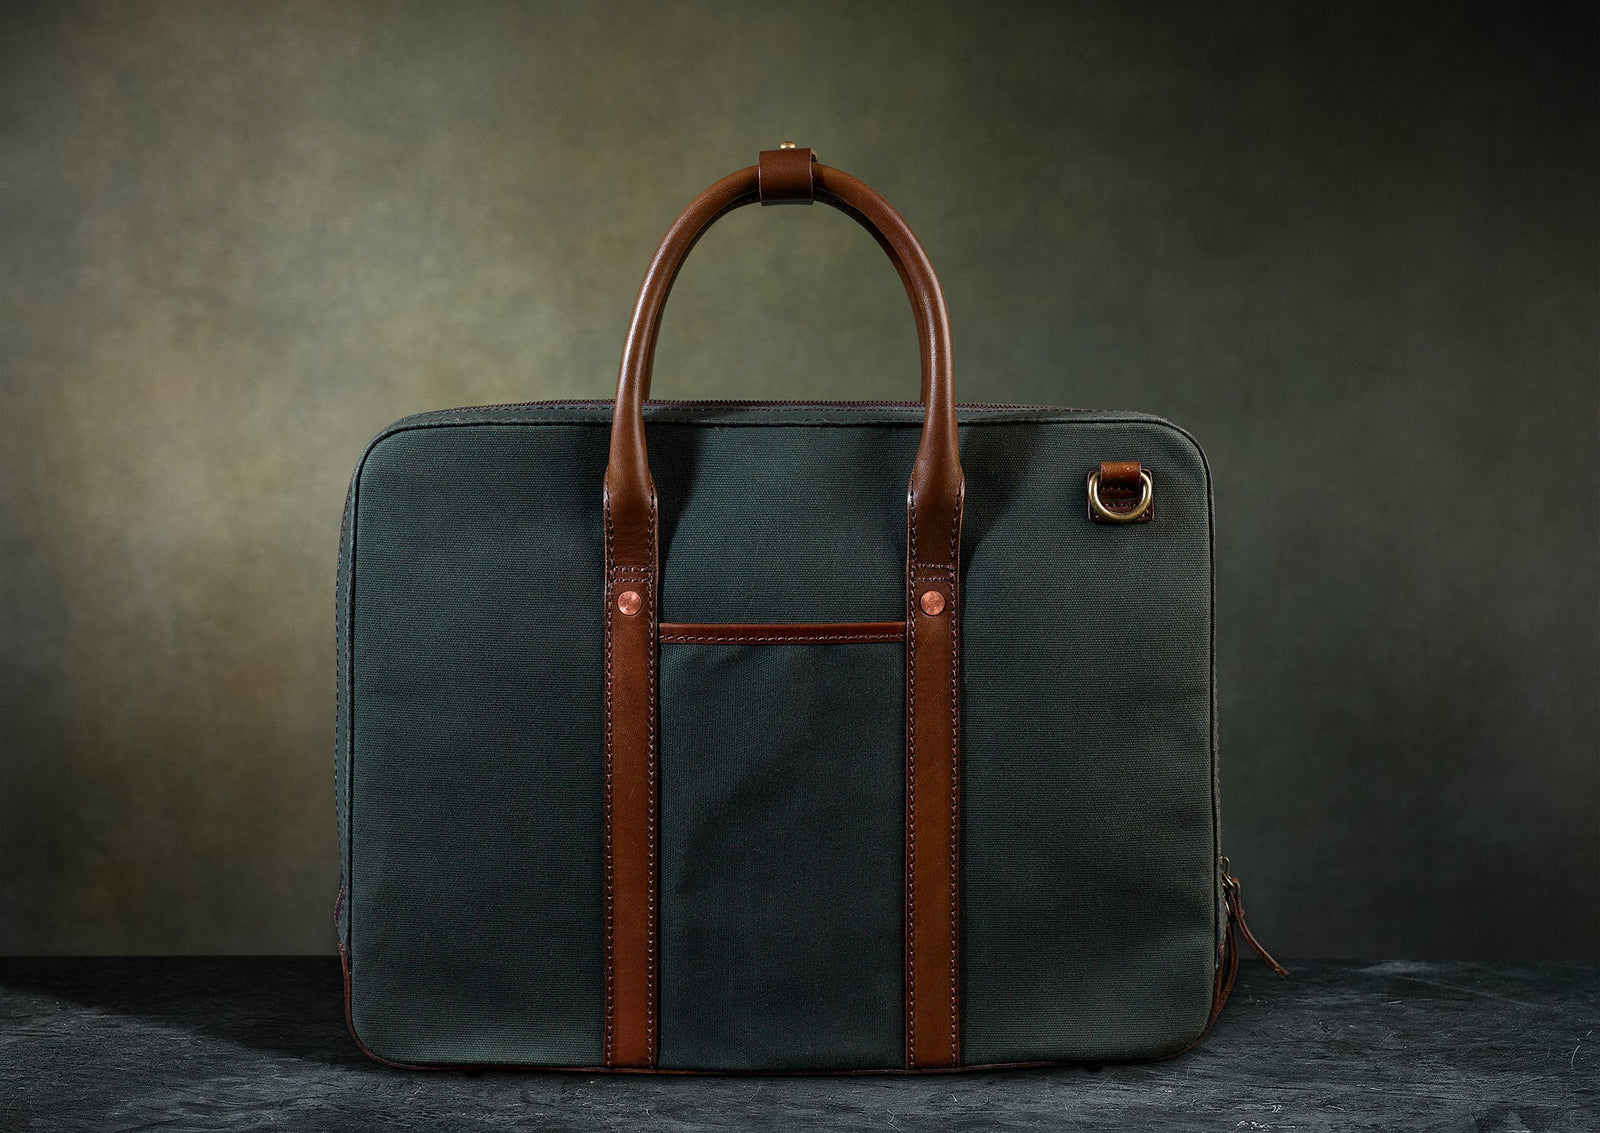 Waxed Canvas Garment Bag - Men's Garment Bag from Satchel & Page